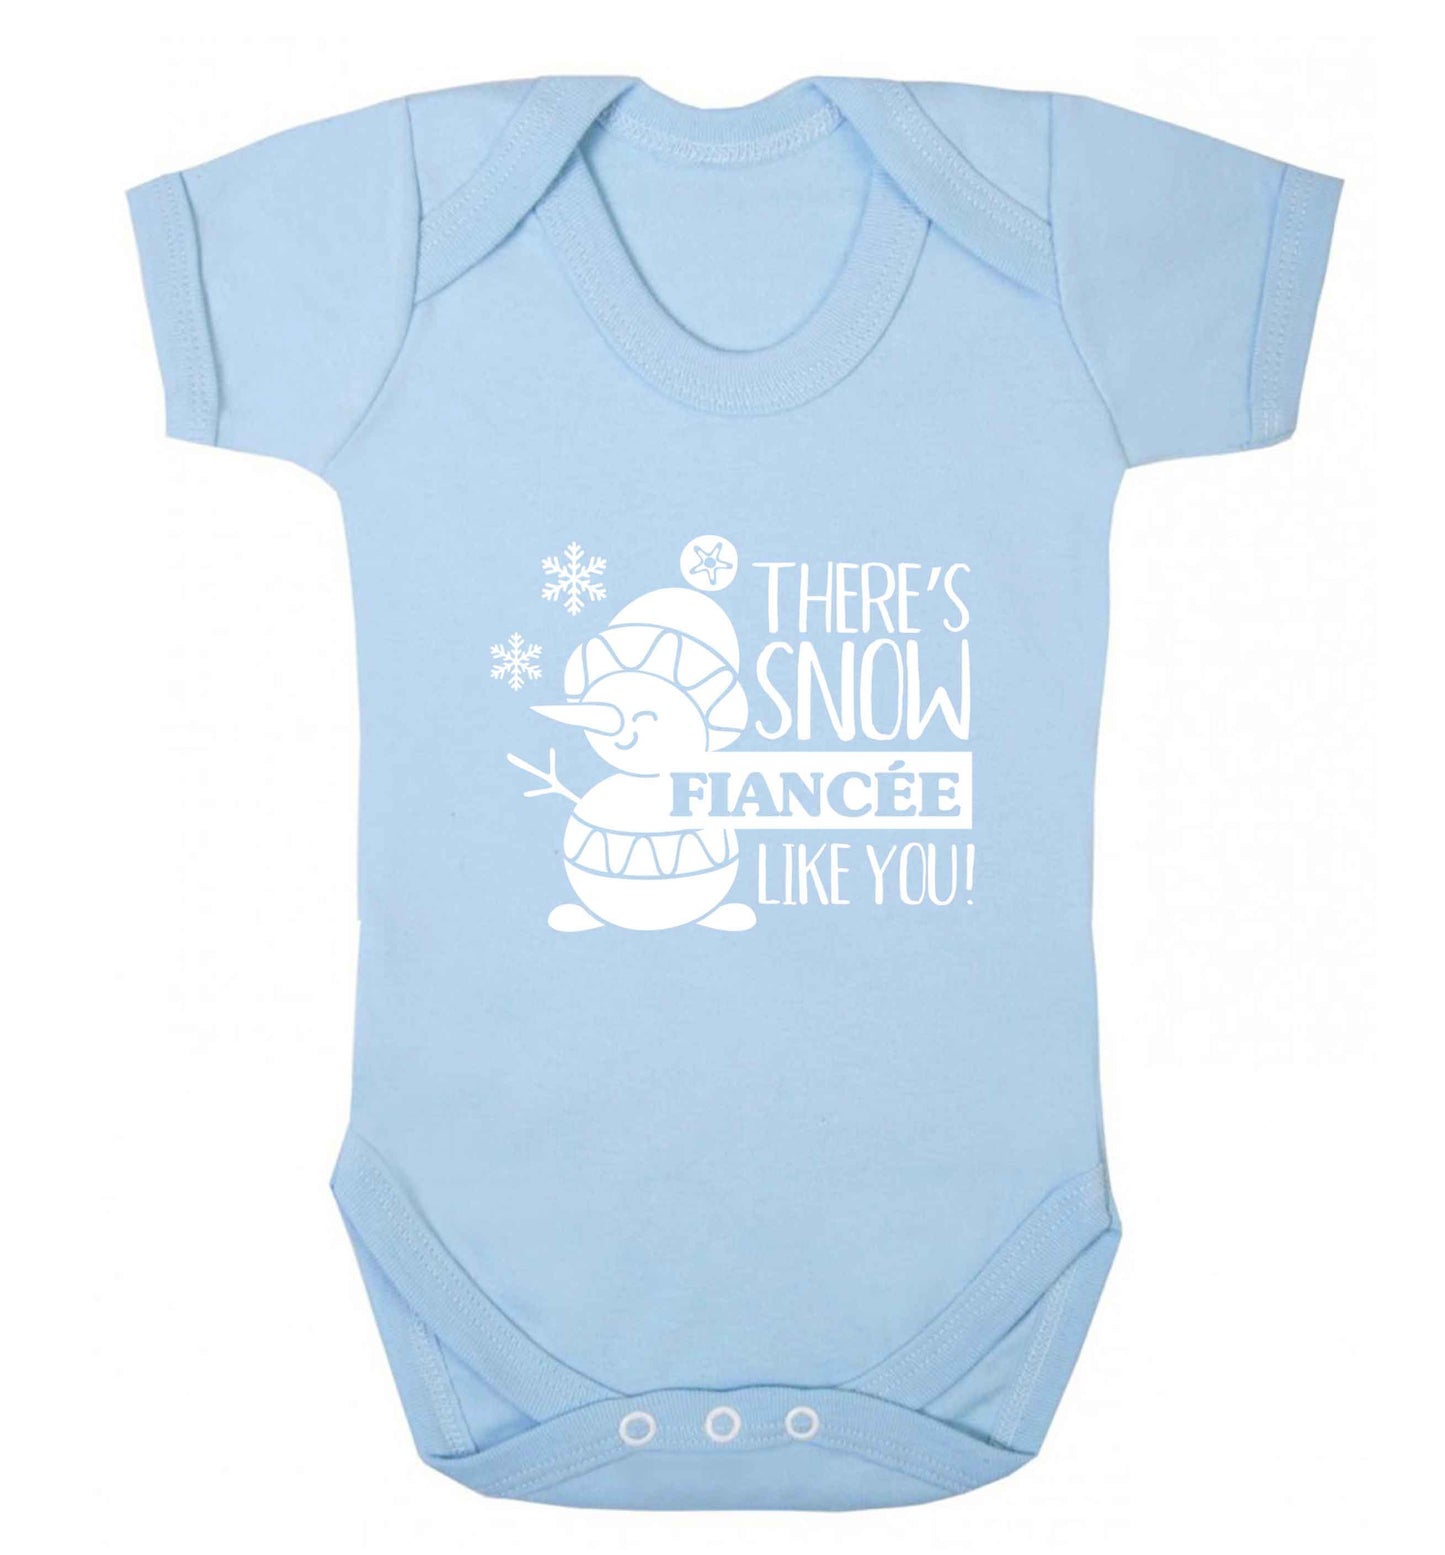 There's snow fiancee like you baby vest pale blue 18-24 months